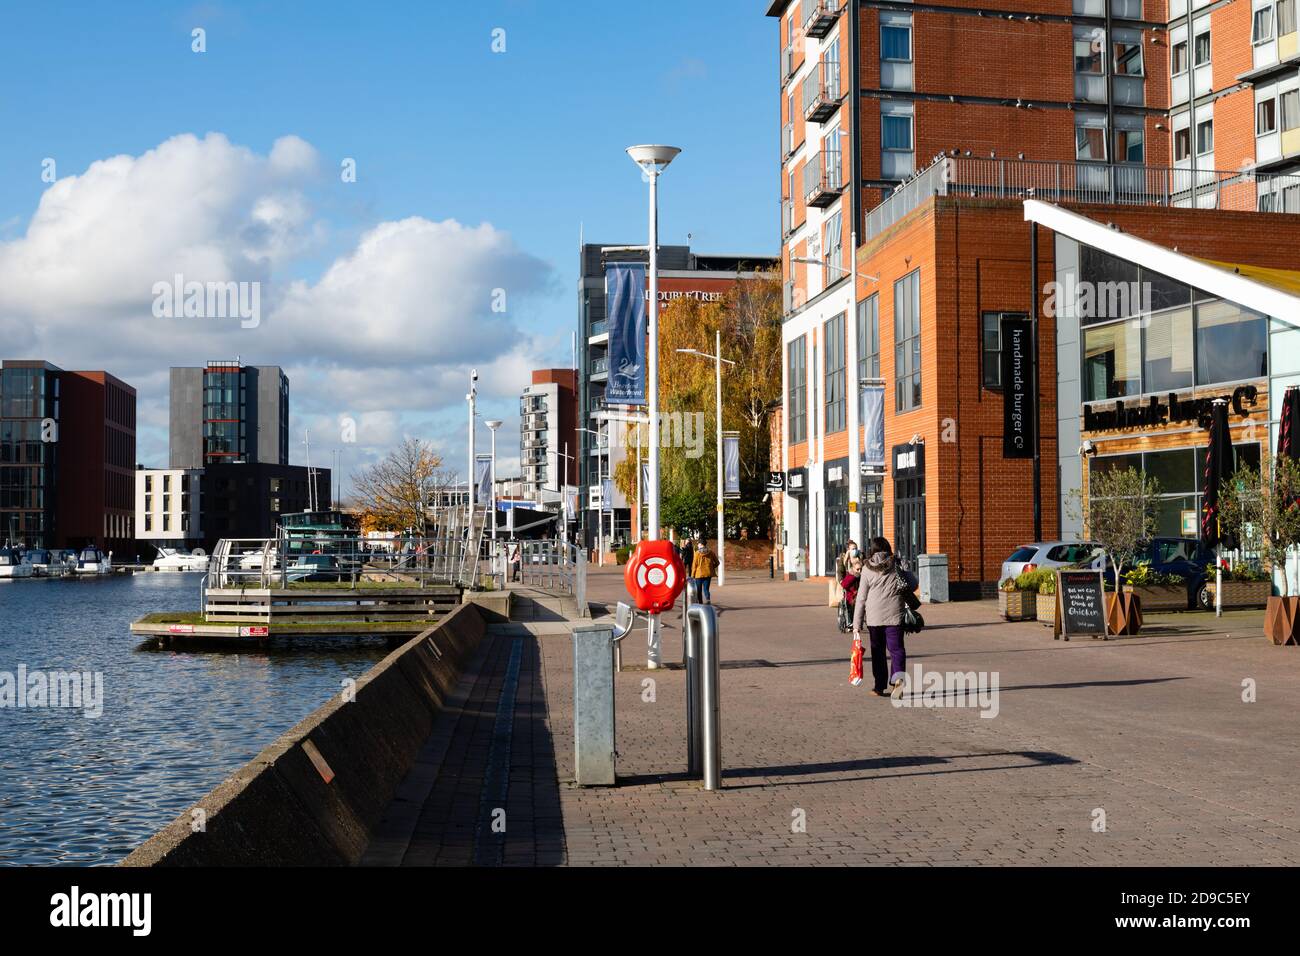 Brayford Wharf and shops with people, Lincoln, Lincolnshire, England, United Kingdom. Stock Photo